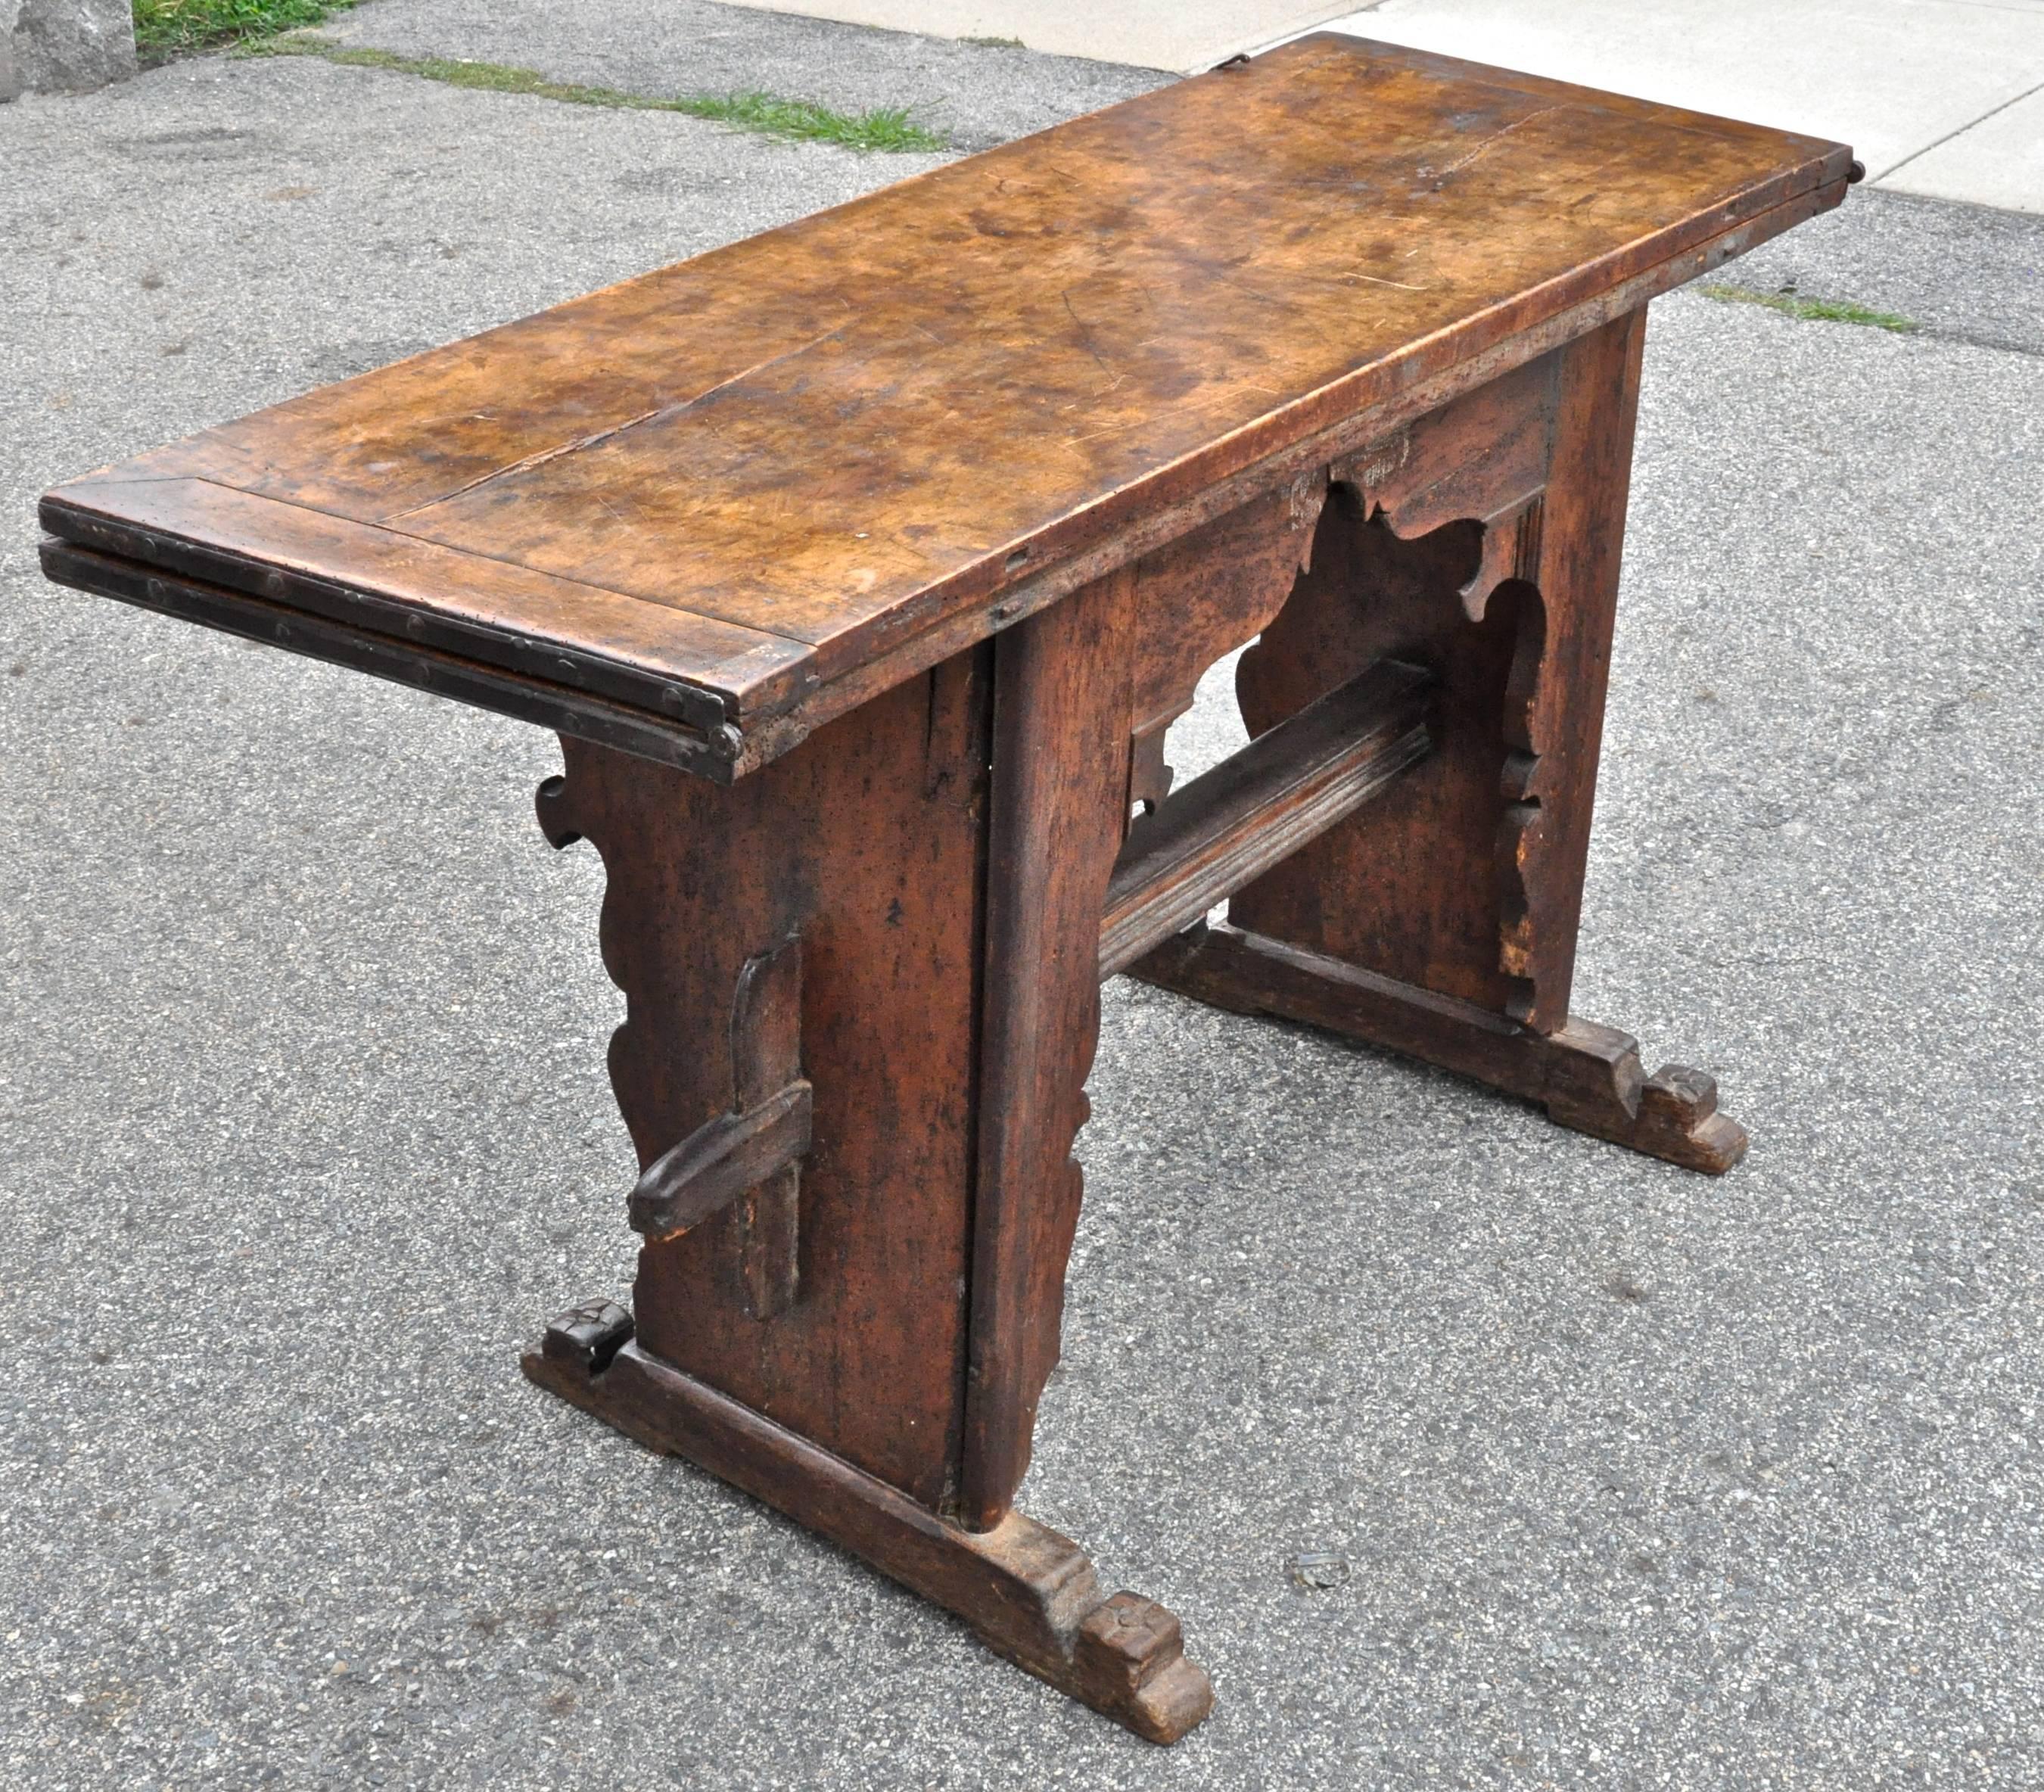 17th century Italian walnut and mixed fruitwood dough table with fold over top

Incredible originality and patina
Swing out supports hold fold over top rendering this piece useful for additional eating or work space
Dough drawer
intriguing